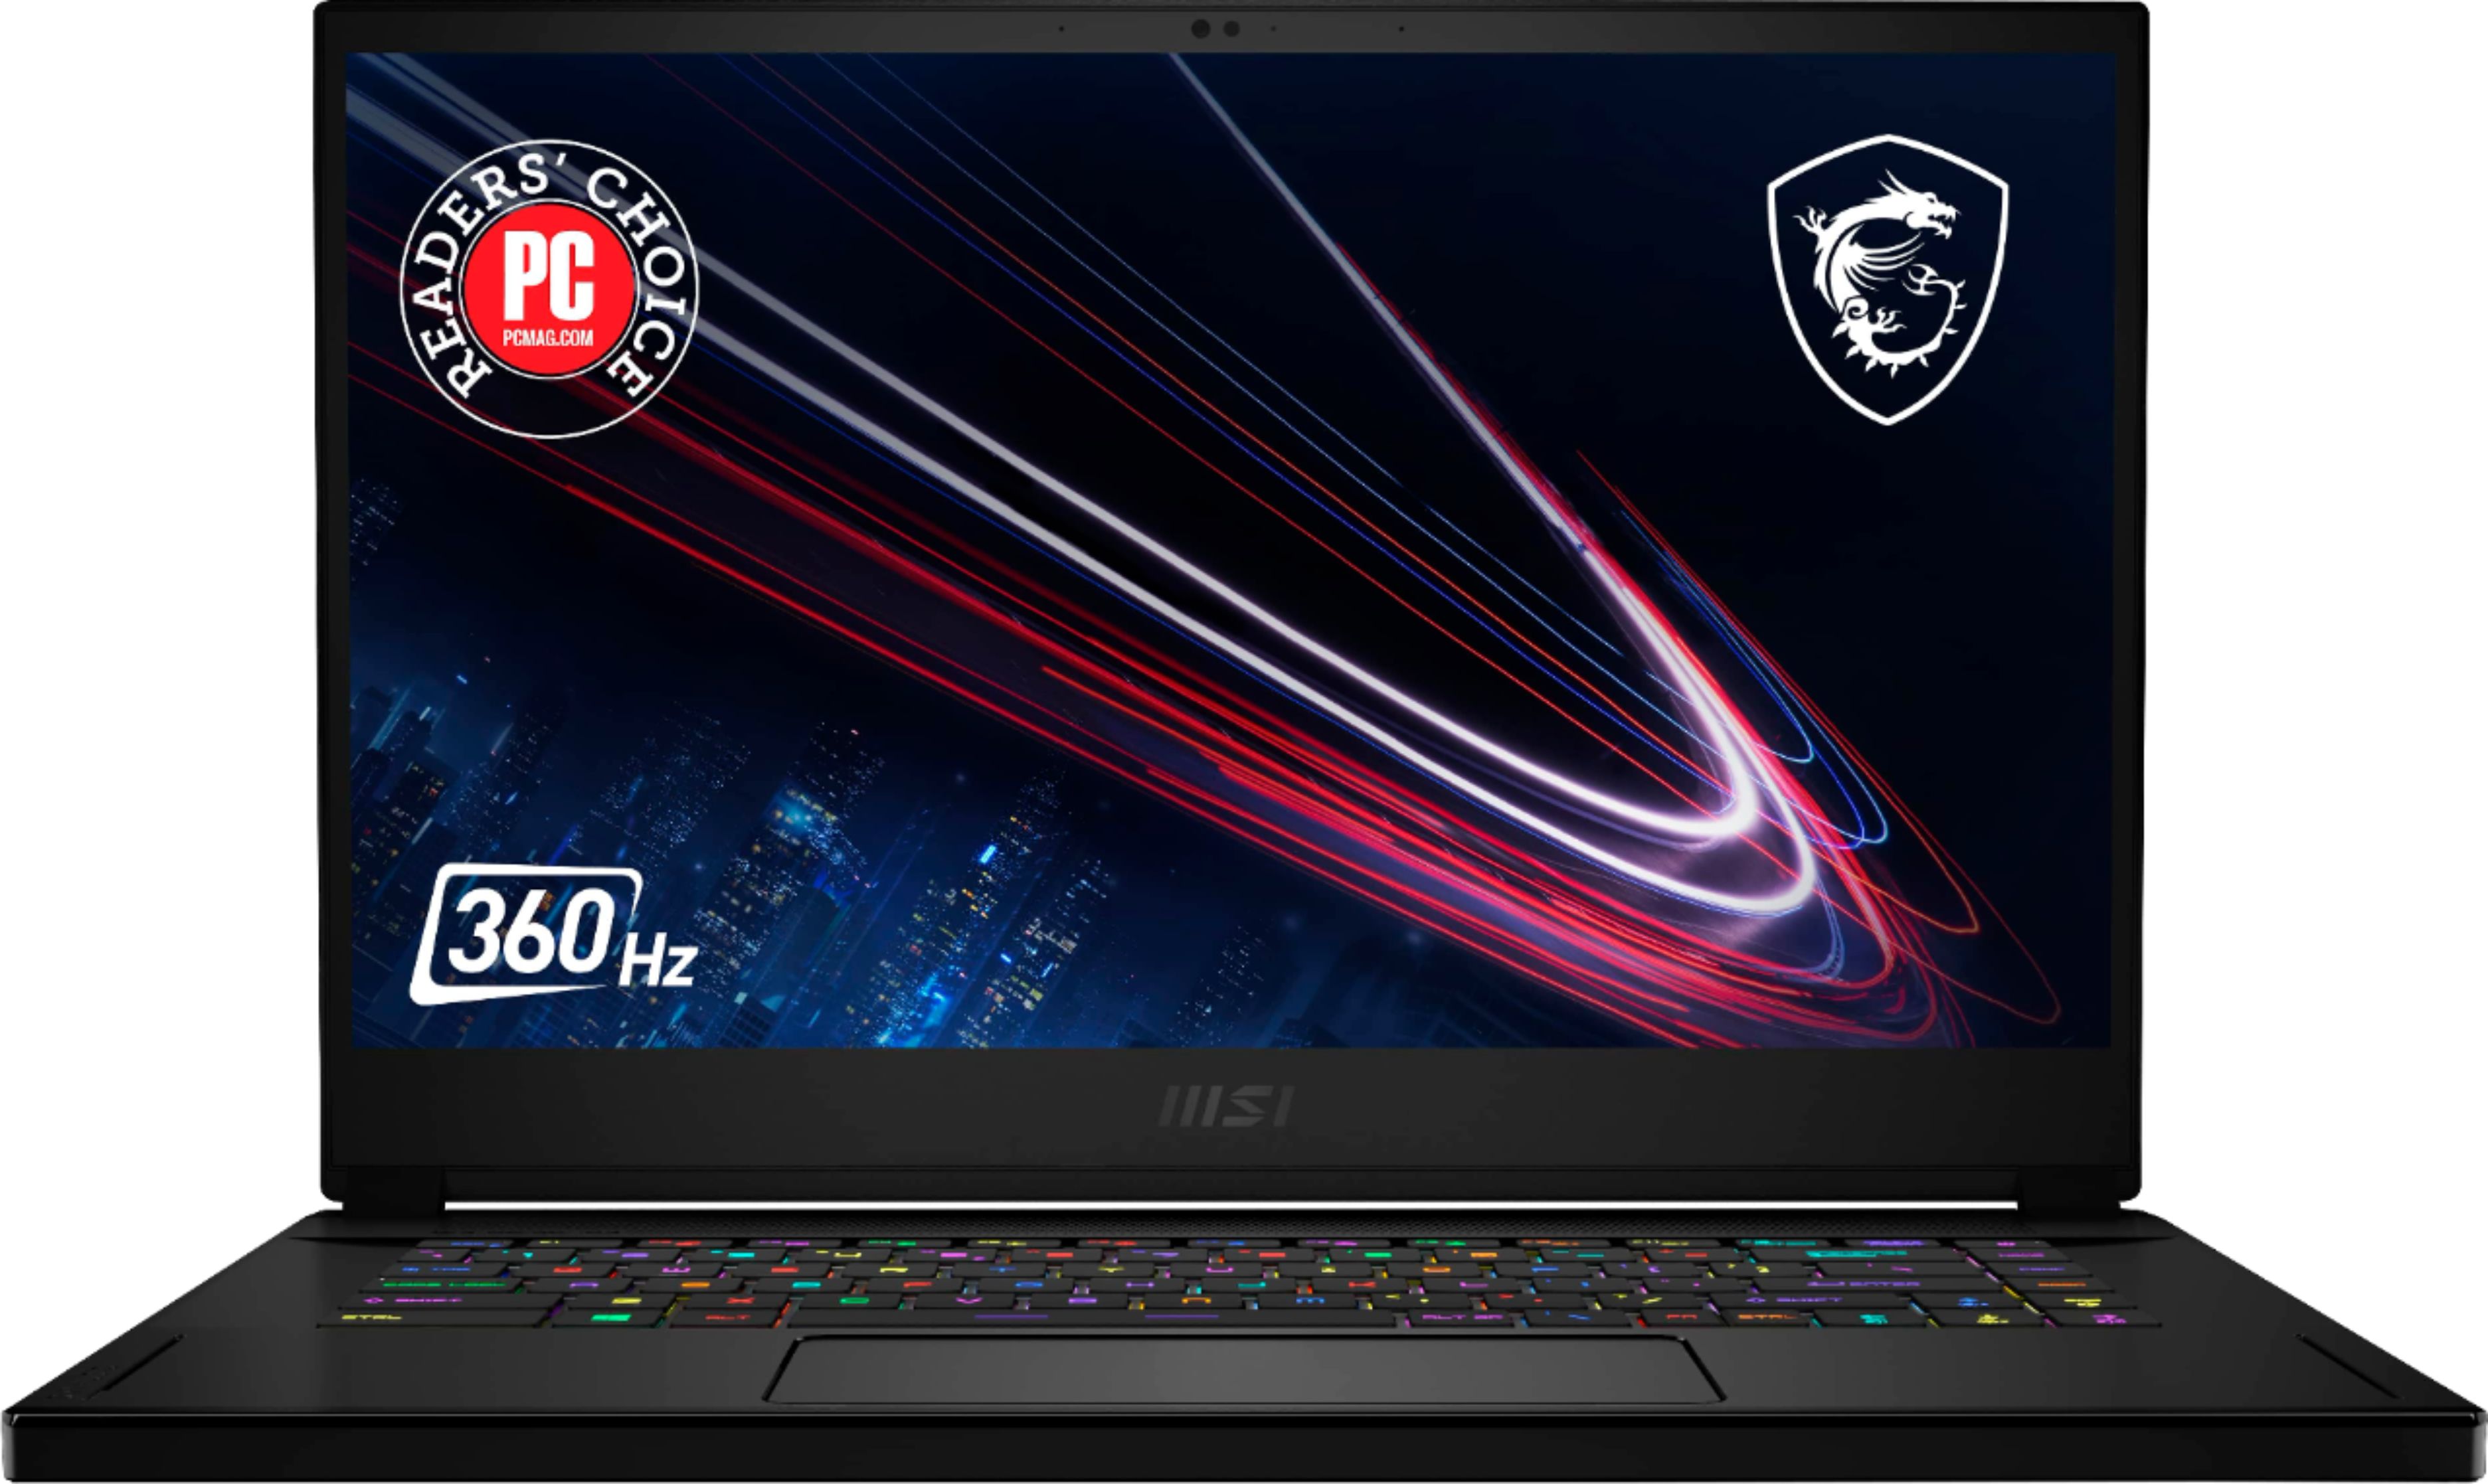 MSI gaming laptop with 360 Hz refresh rate.